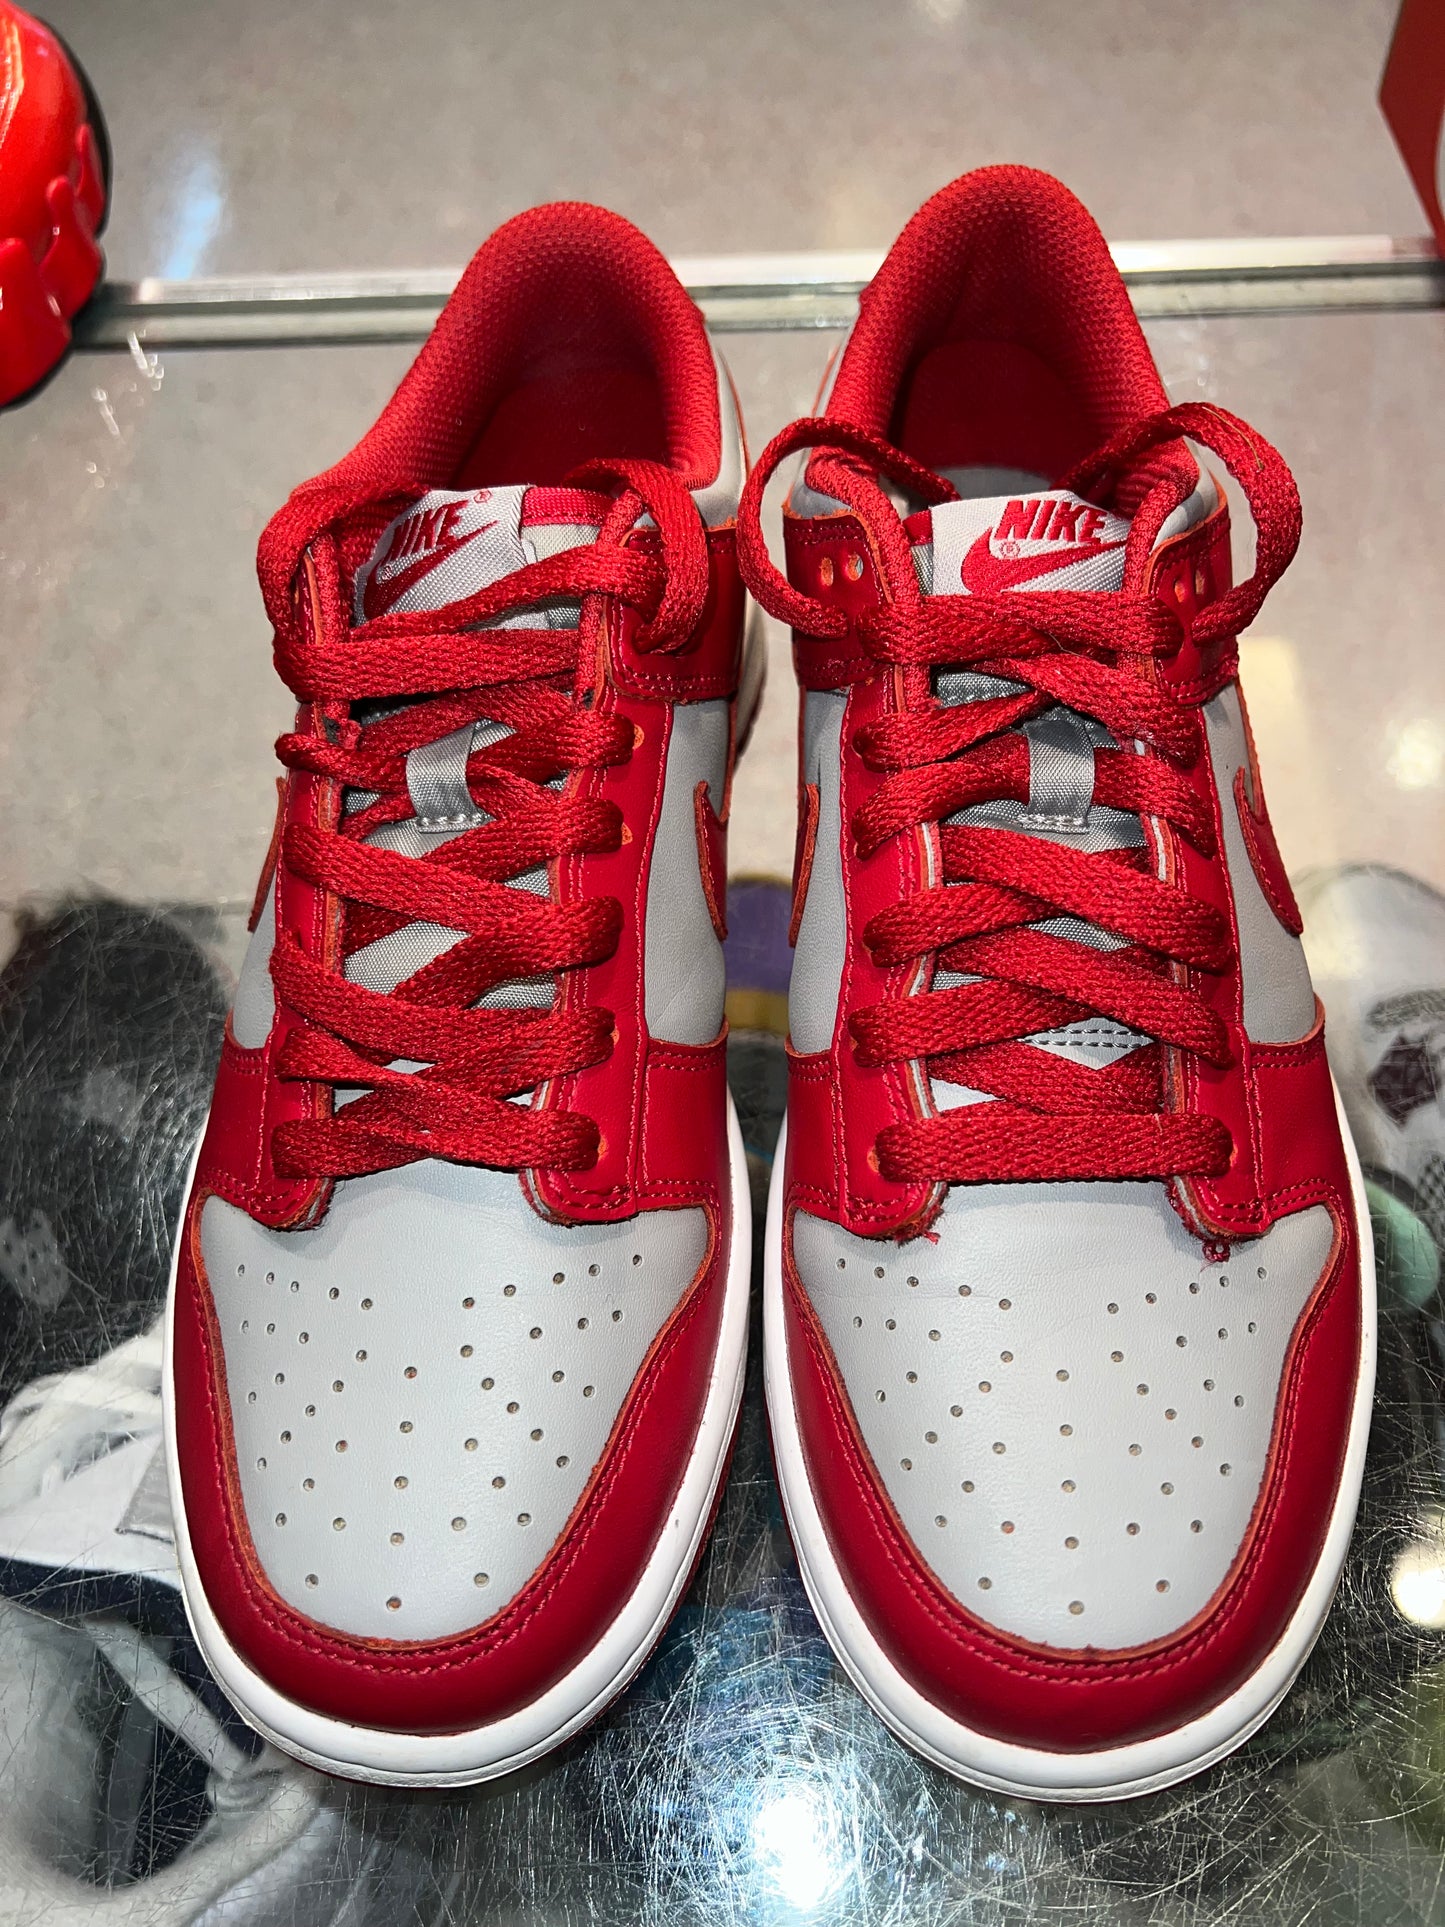 Size 5.5Y Dunk Low “UNLV (Mall)